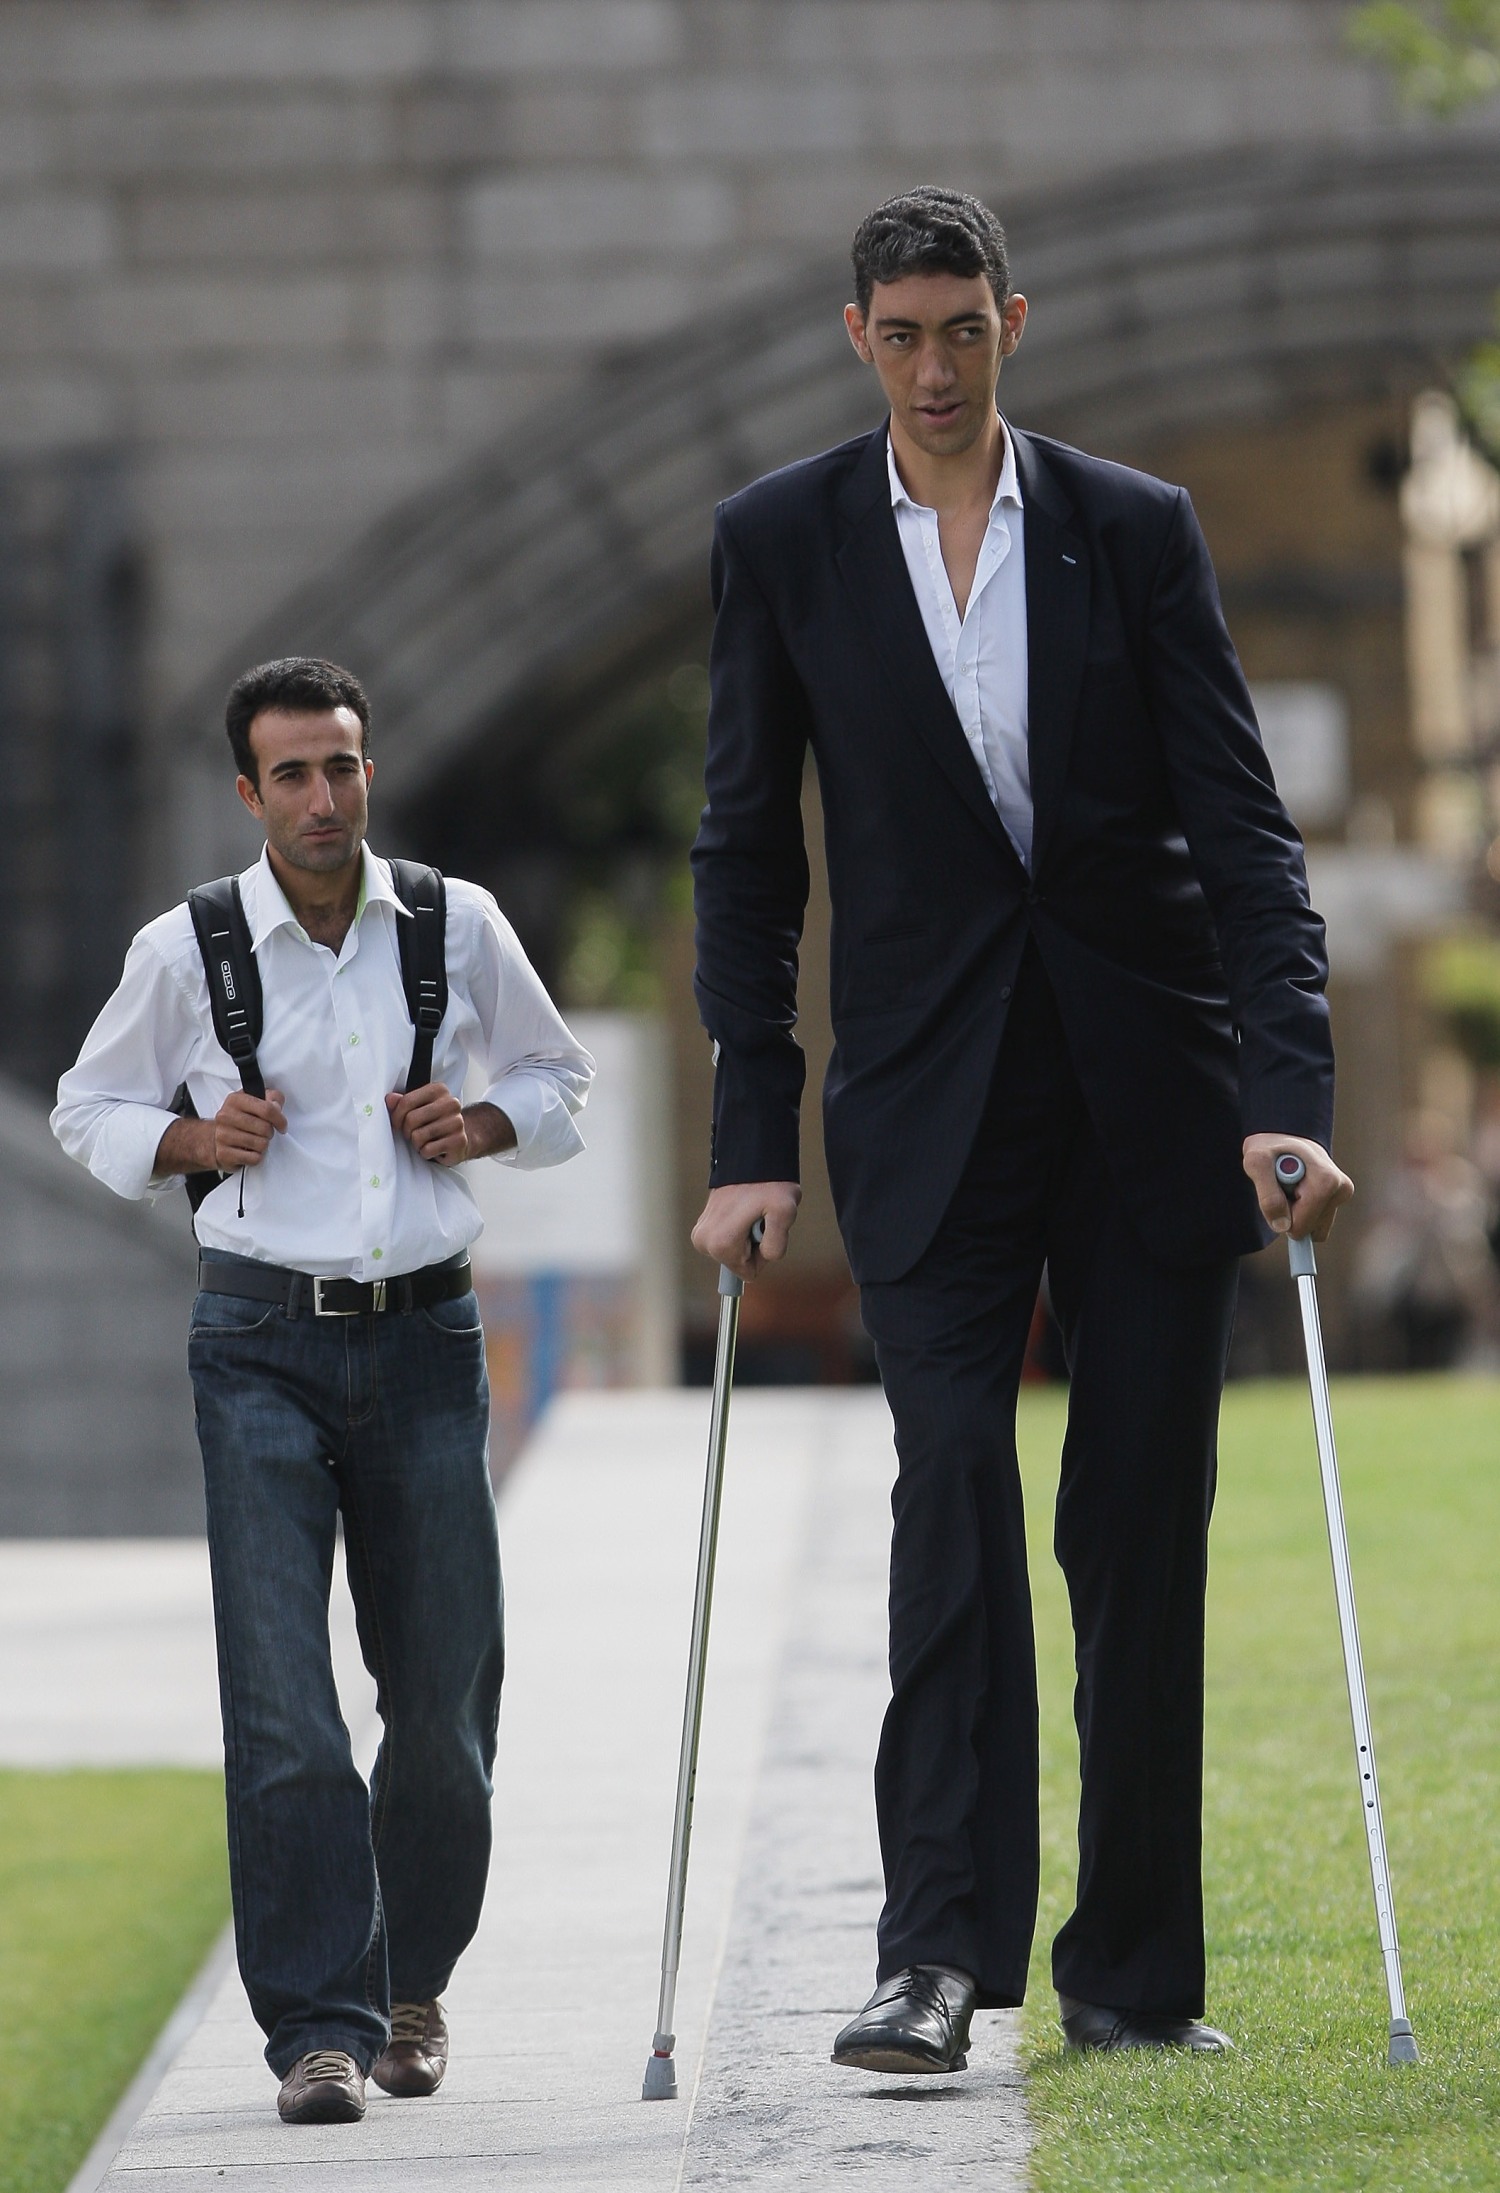 8-foot-1-inch Turk crowned world's tallest man